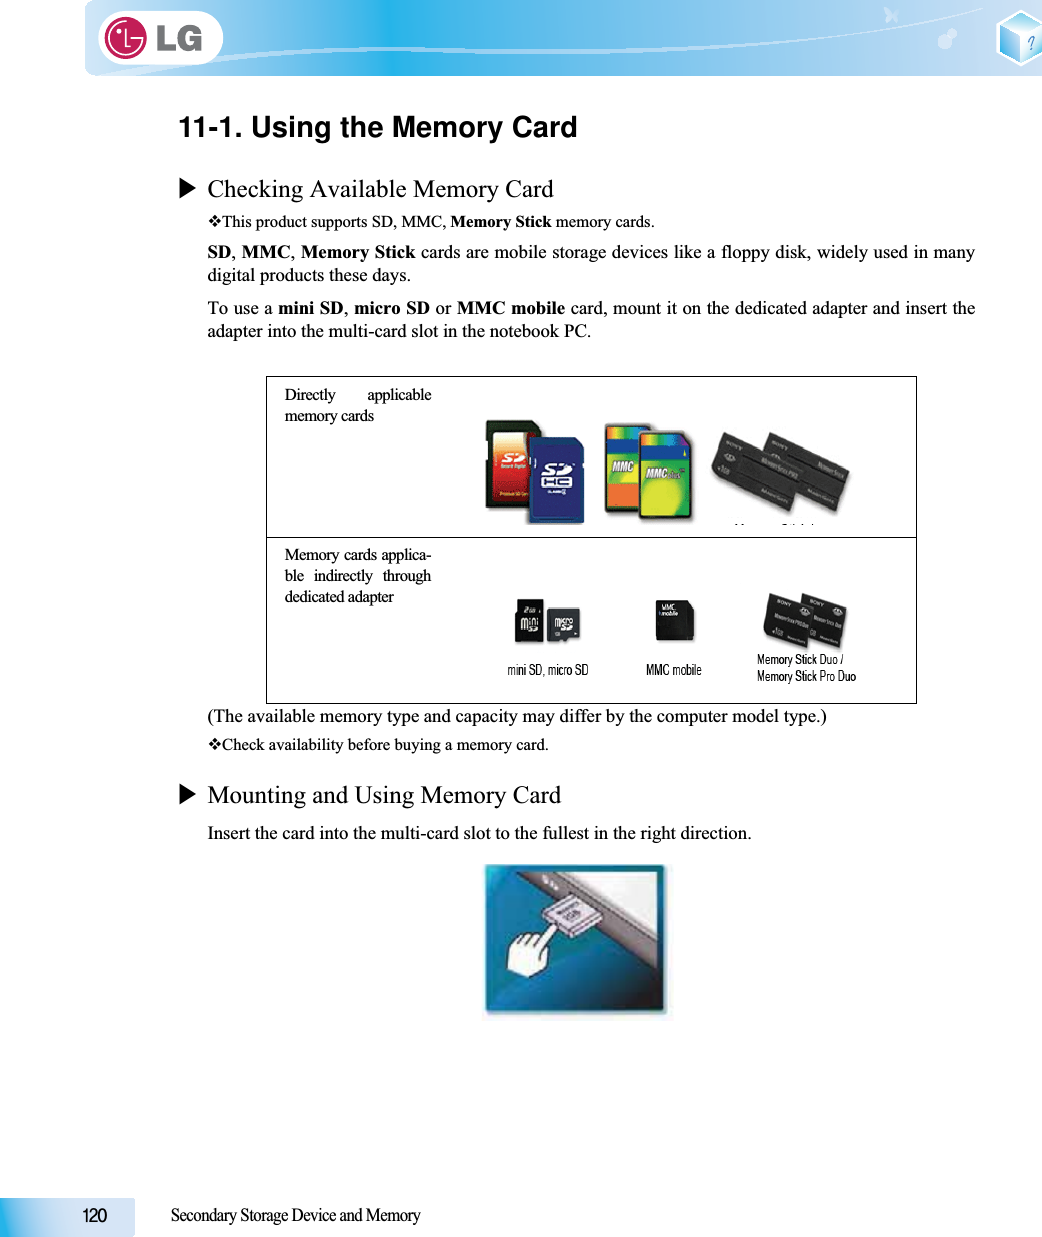 Secondary Storage Device and Memory11-1. Using the Memory CardXChecking Available Memory CardThis product supports SD, MMC, Memory Stick memory cards.SD,MMC,Memory Stick cards are mobile storage devices like a floppy disk, widely used in manydigital products these days. To use a mini SD,micro SD or MMC mobile card, mount it on the dedicated adapter and insert theadapter into the multi-card slot in the notebook PC.(The available memory type and capacity may differ by the computer model type.) Check availability before buying a memory card.XMounting and Using Memory CardInsert the card into the multi-card slot to the fullest in the right direction.Directly applicablememory cardsMemory cards applica-ble indirectly throughdedicated adapter